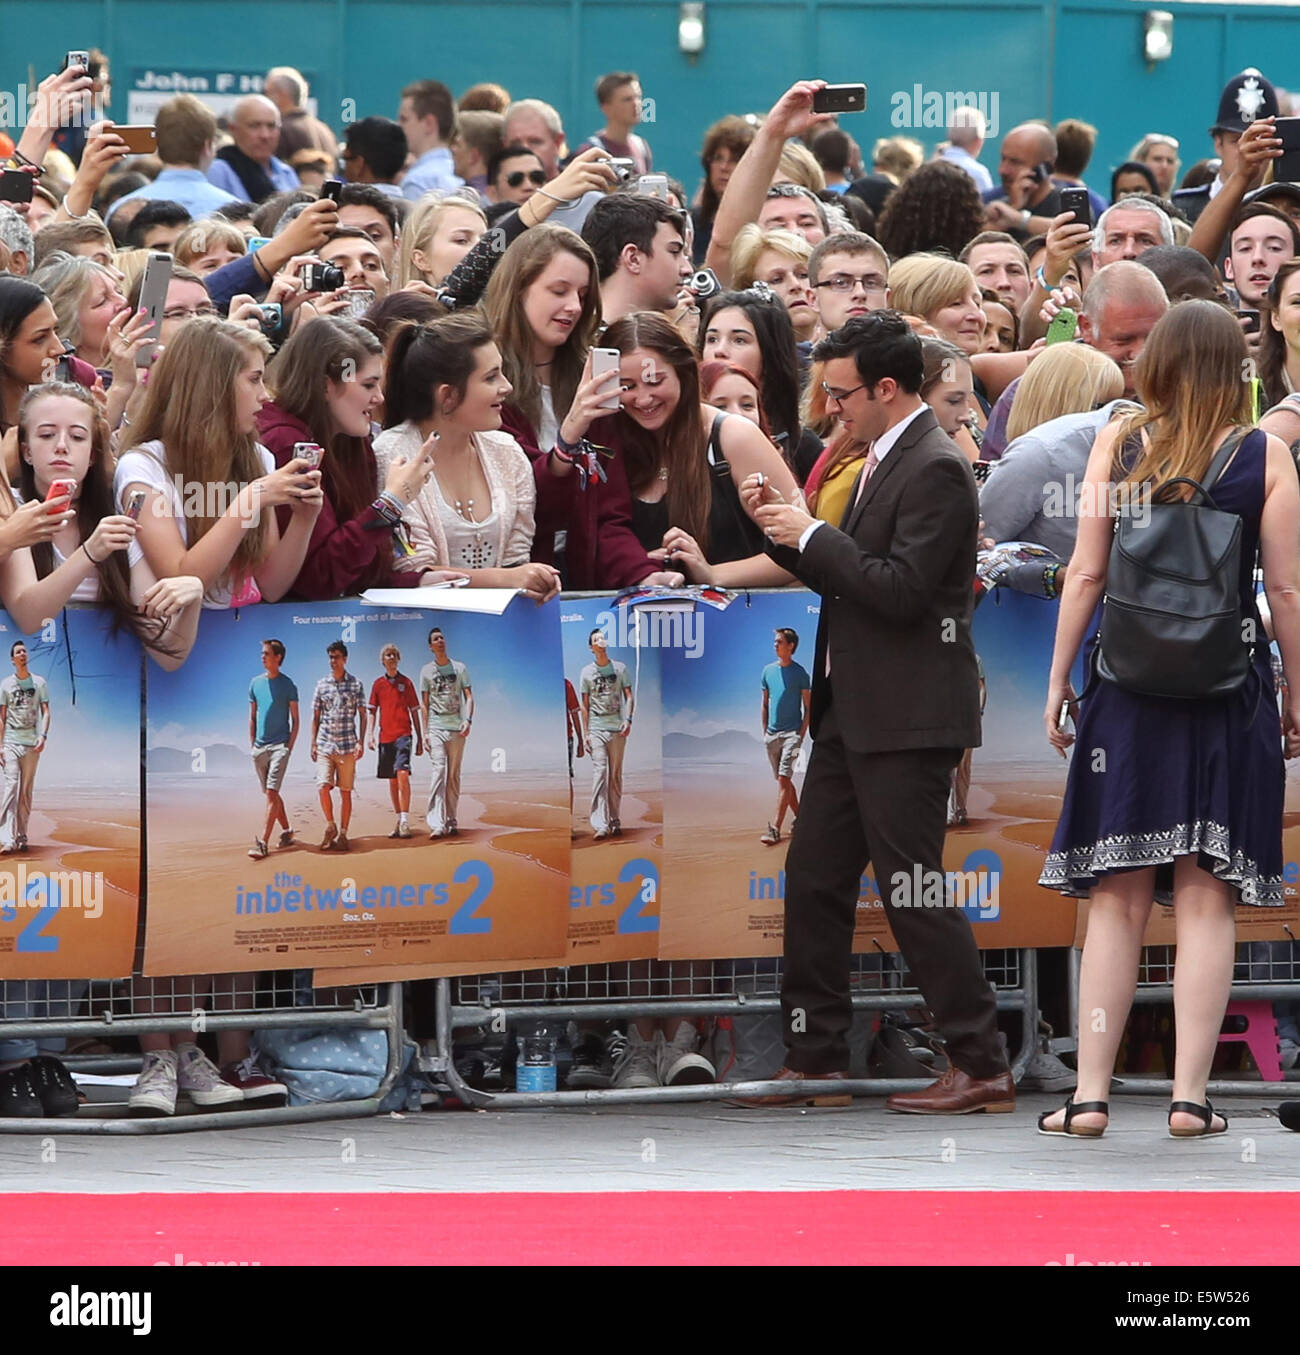 London, UK. 5th Aug, 2014. Simon Bird attends The World Premiere of The Inbetweeners 2 on 05/08/2014 at The VUE Leicester Square, London. Persons pictured: Simon Bird Credit:  swift-creative/Alamy Live News Stock Photo